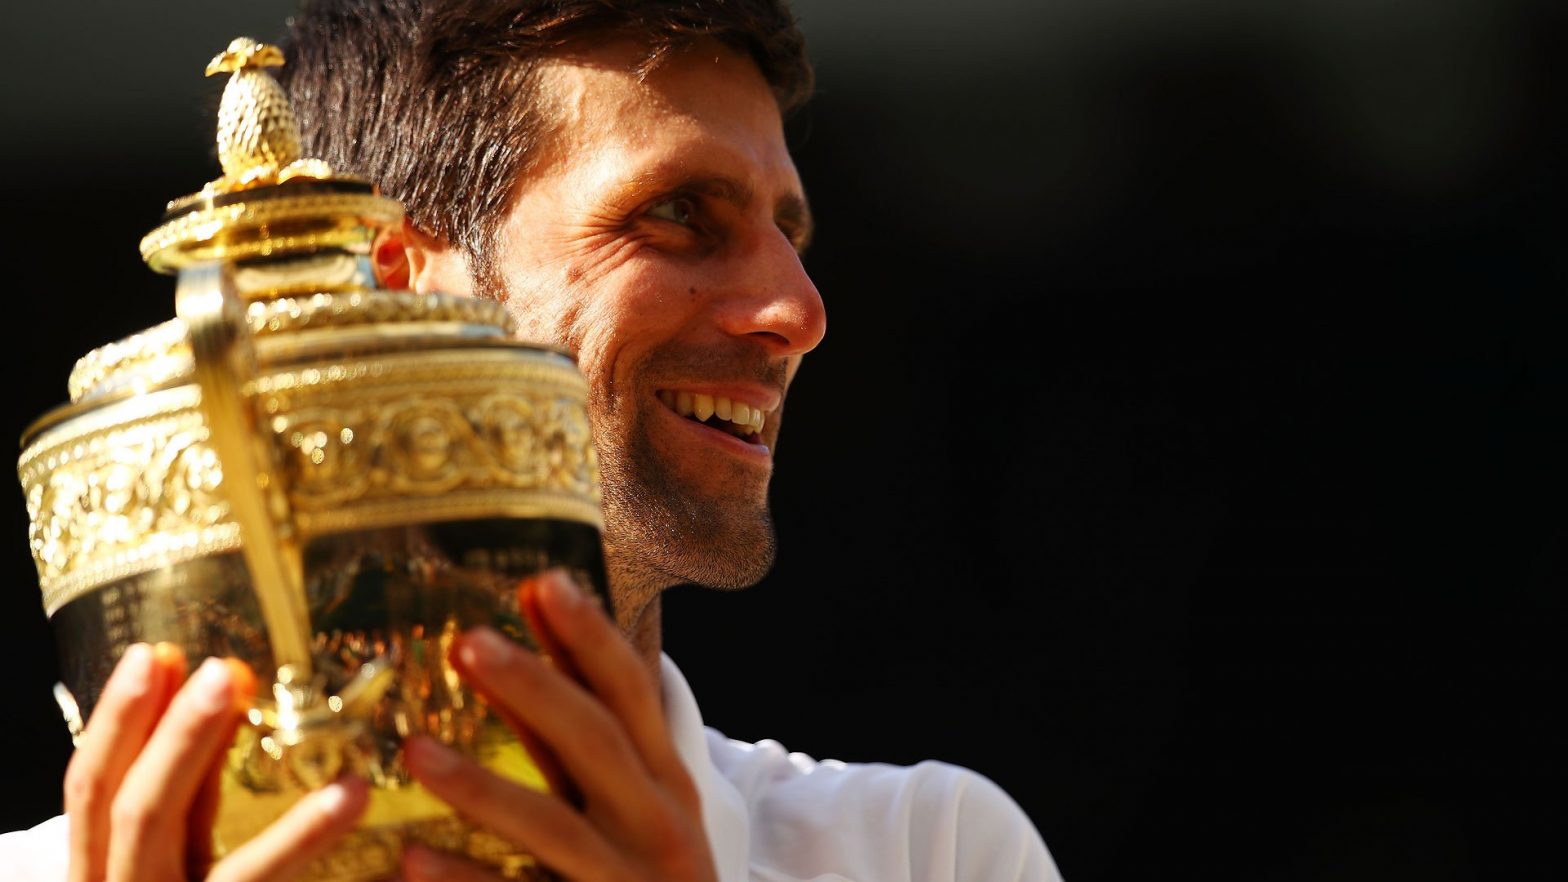 Top 5 longest matches in Wimbledon history